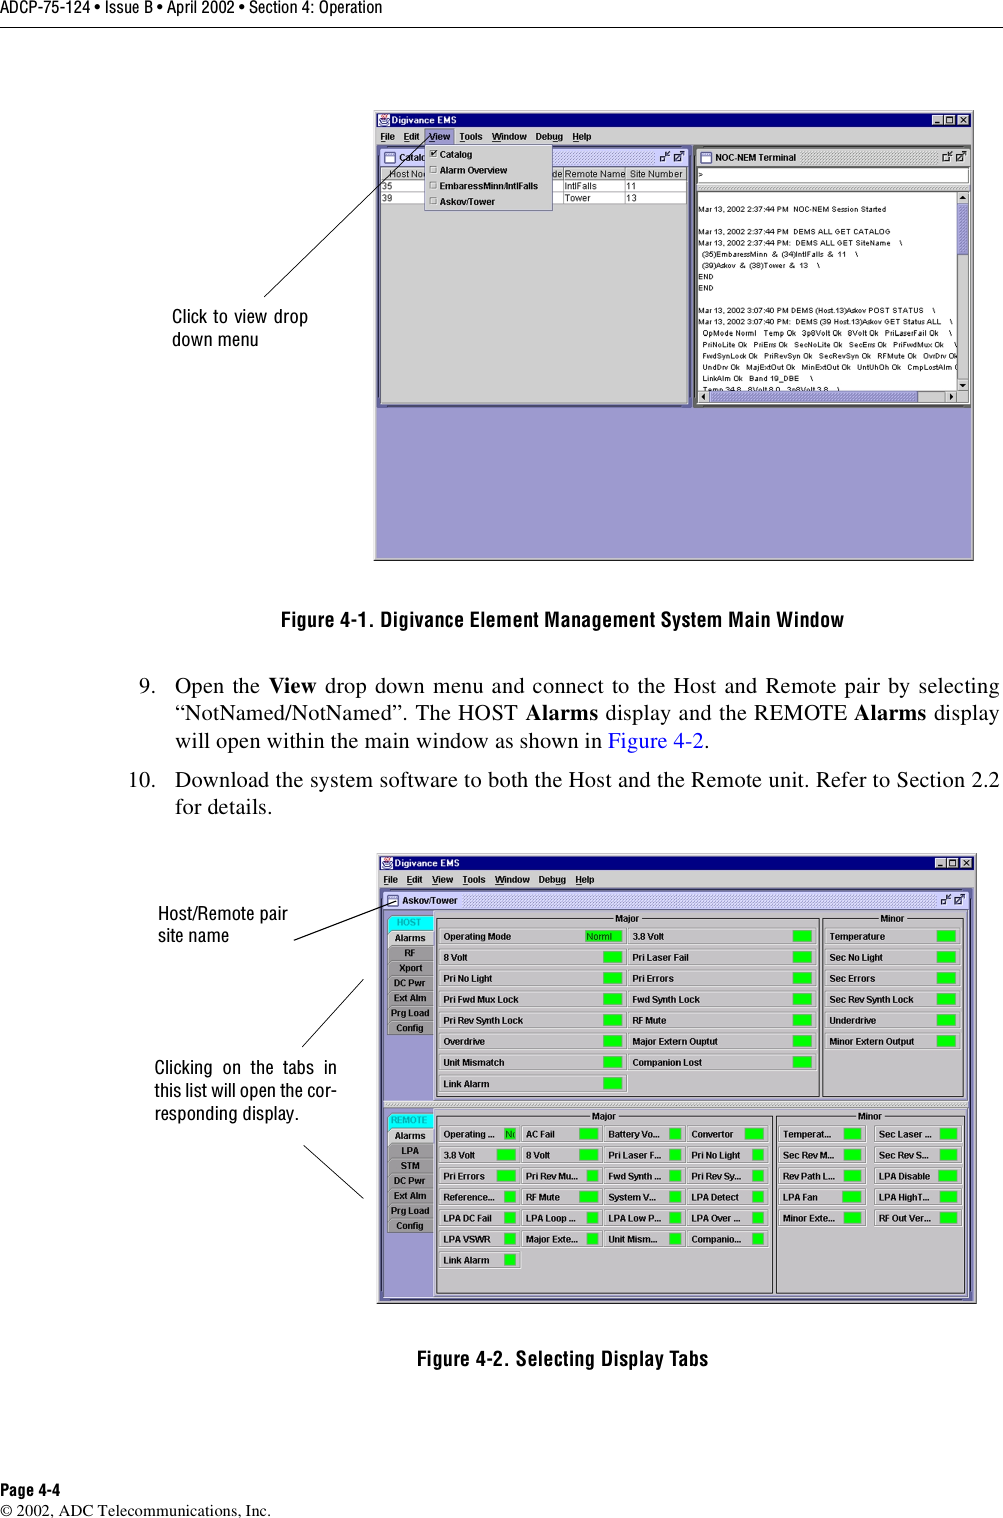 ADCP-75-124 • Issue B • April 2002 • Section 4: OperationPage 4-4©2002, ADC Telecommunications, Inc.Figure 4-1. Digivance Element Management System Main Window9. Open the View drop down menu and connect to the Host and Remote pair by selecting“NotNamed/NotNamed”. The HOST Alarms display and the REMOTE Alarms displaywill open within the main window as shown in Figure 4-2.10. Download the system software to both the Host and the Remote unit. Refer to Section 2.2for details.Figure 4-2. Selecting Display TabsClick to view dropdown menuClicking on the tabs inthis list will open the cor-responding display.Host/Remote pairsite name